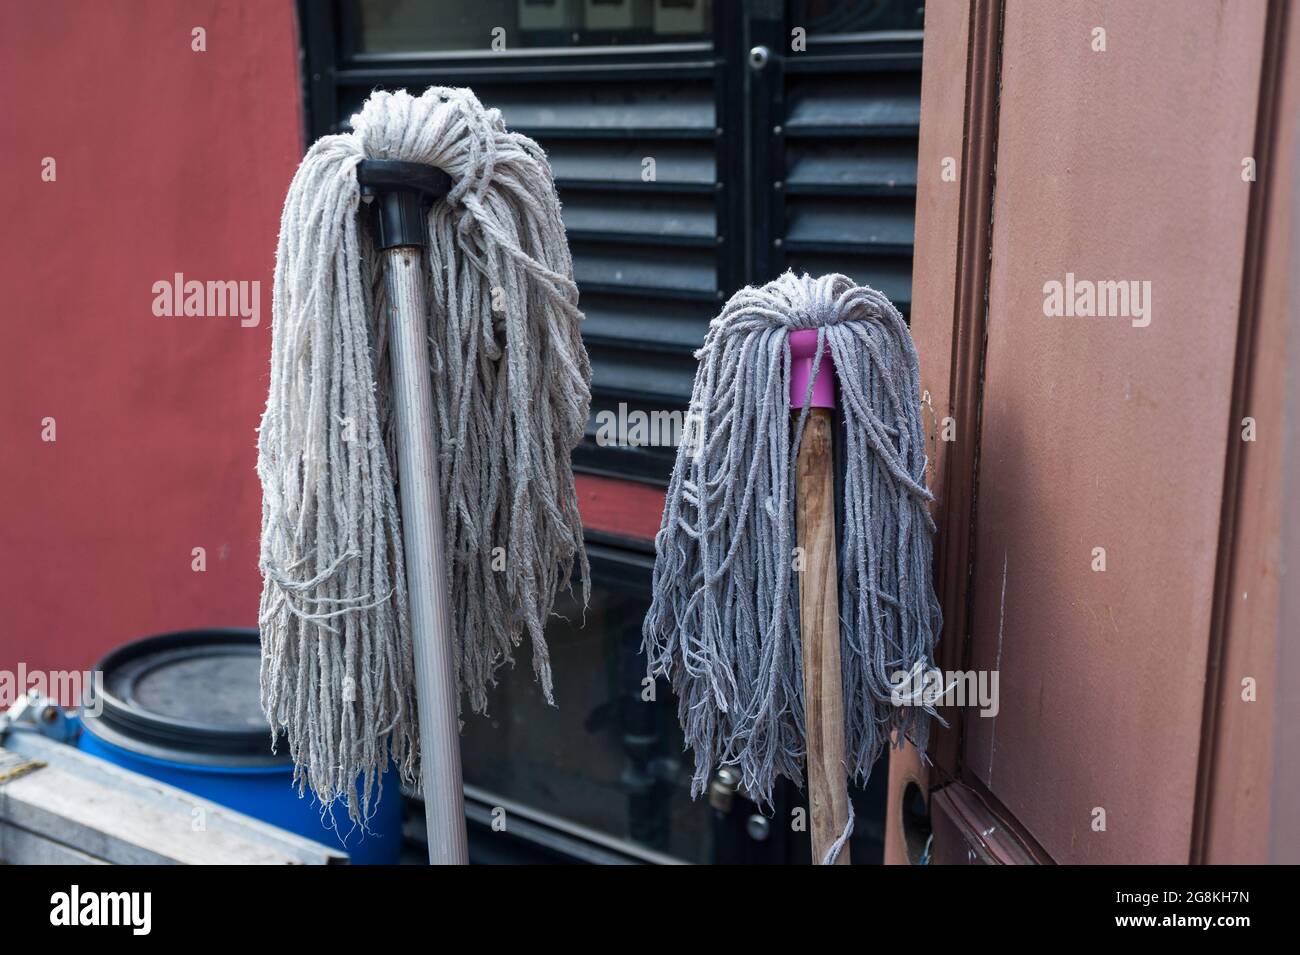 07.07.2017, Singapore, Republic of Singapore, Asia - Two damp floor mops lean against a window for drying in the city district of Chinatown. Stock Photo